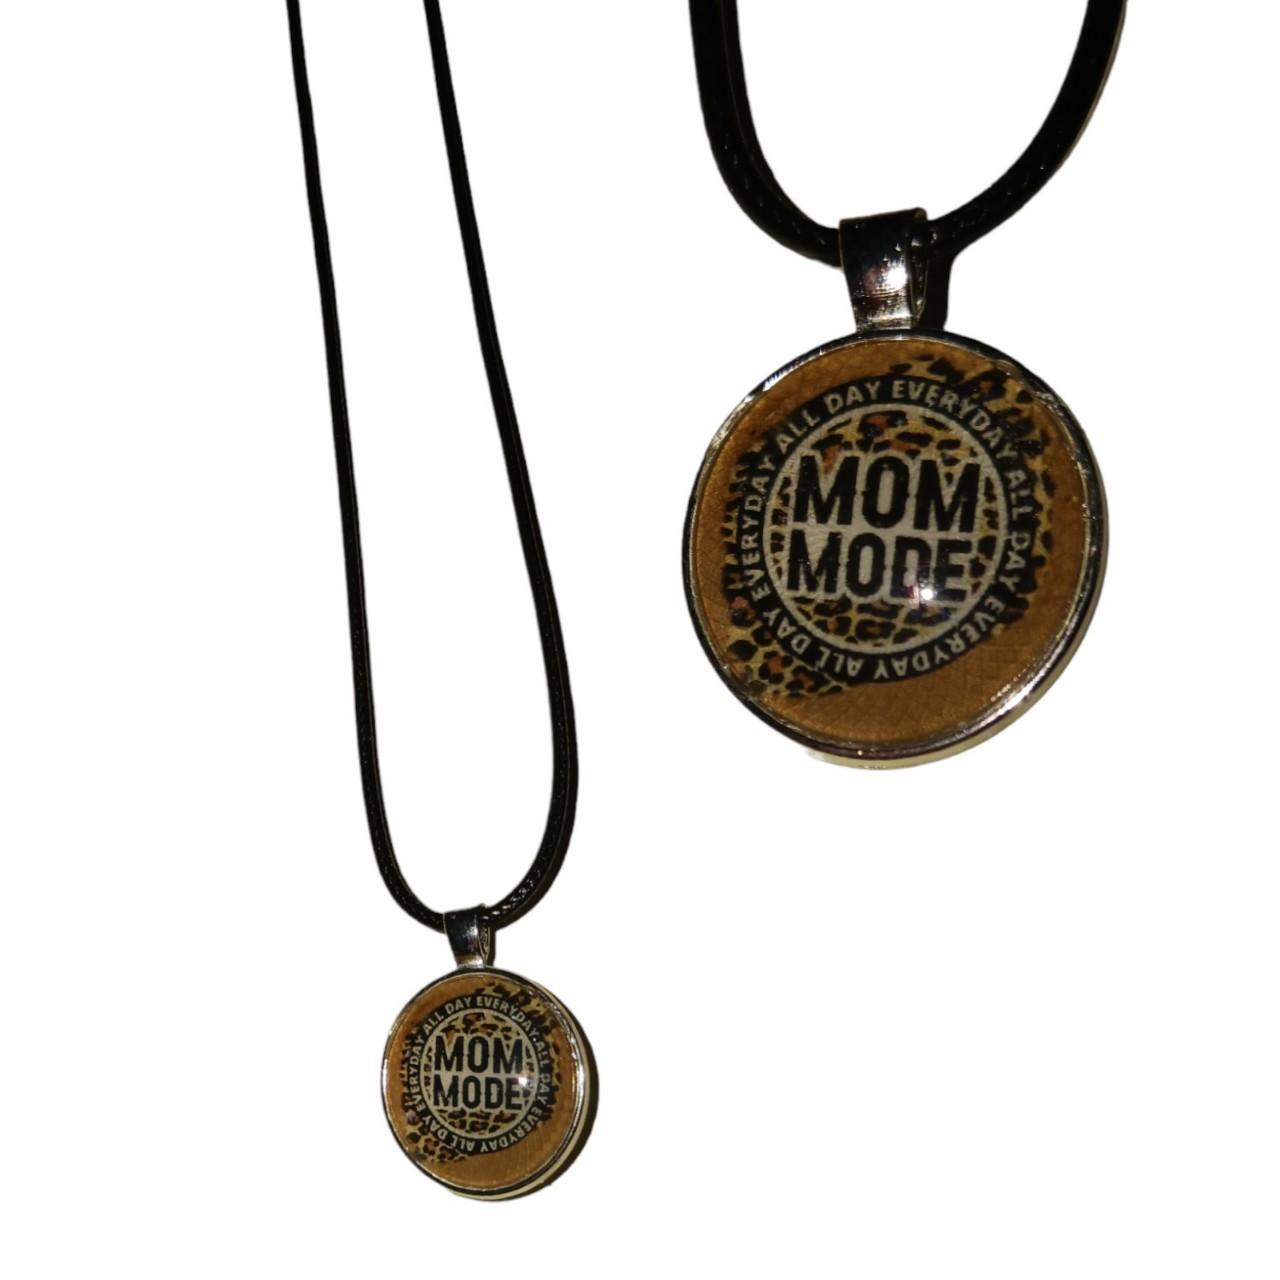 Mom mode necklace on black necklace cord with - Depop